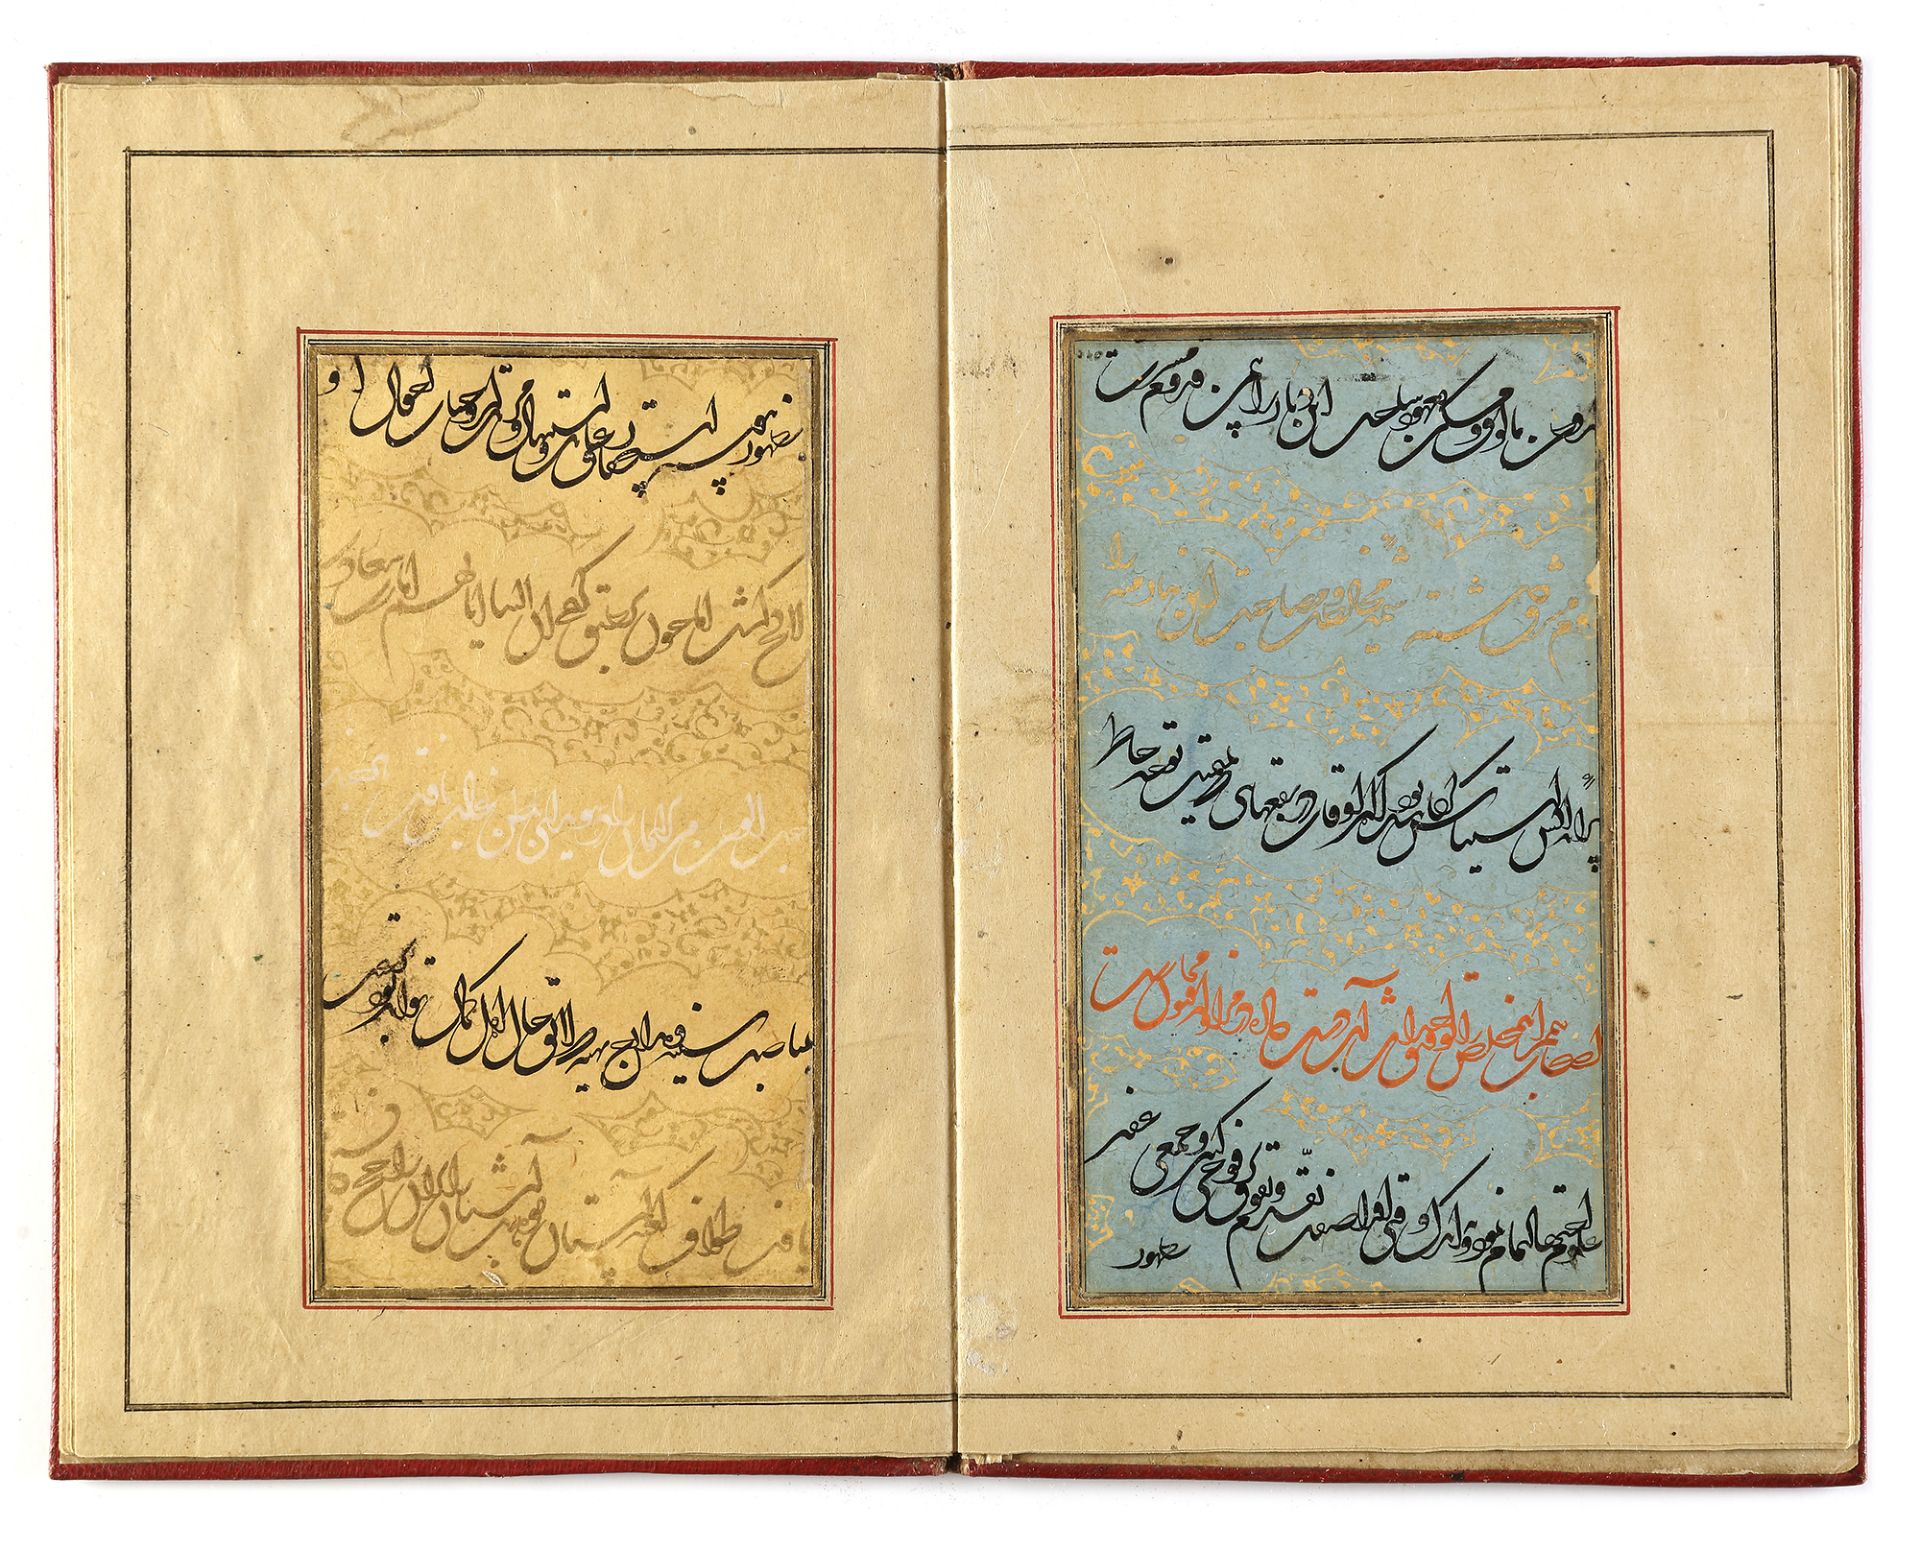 A MANUSCRIPT OF POETRY, SIGNED BY IKHTIYAR AL-MUNSHI, PERSIA, SAVAFID, DATED 975 AH/1567-68 AD - Image 5 of 18